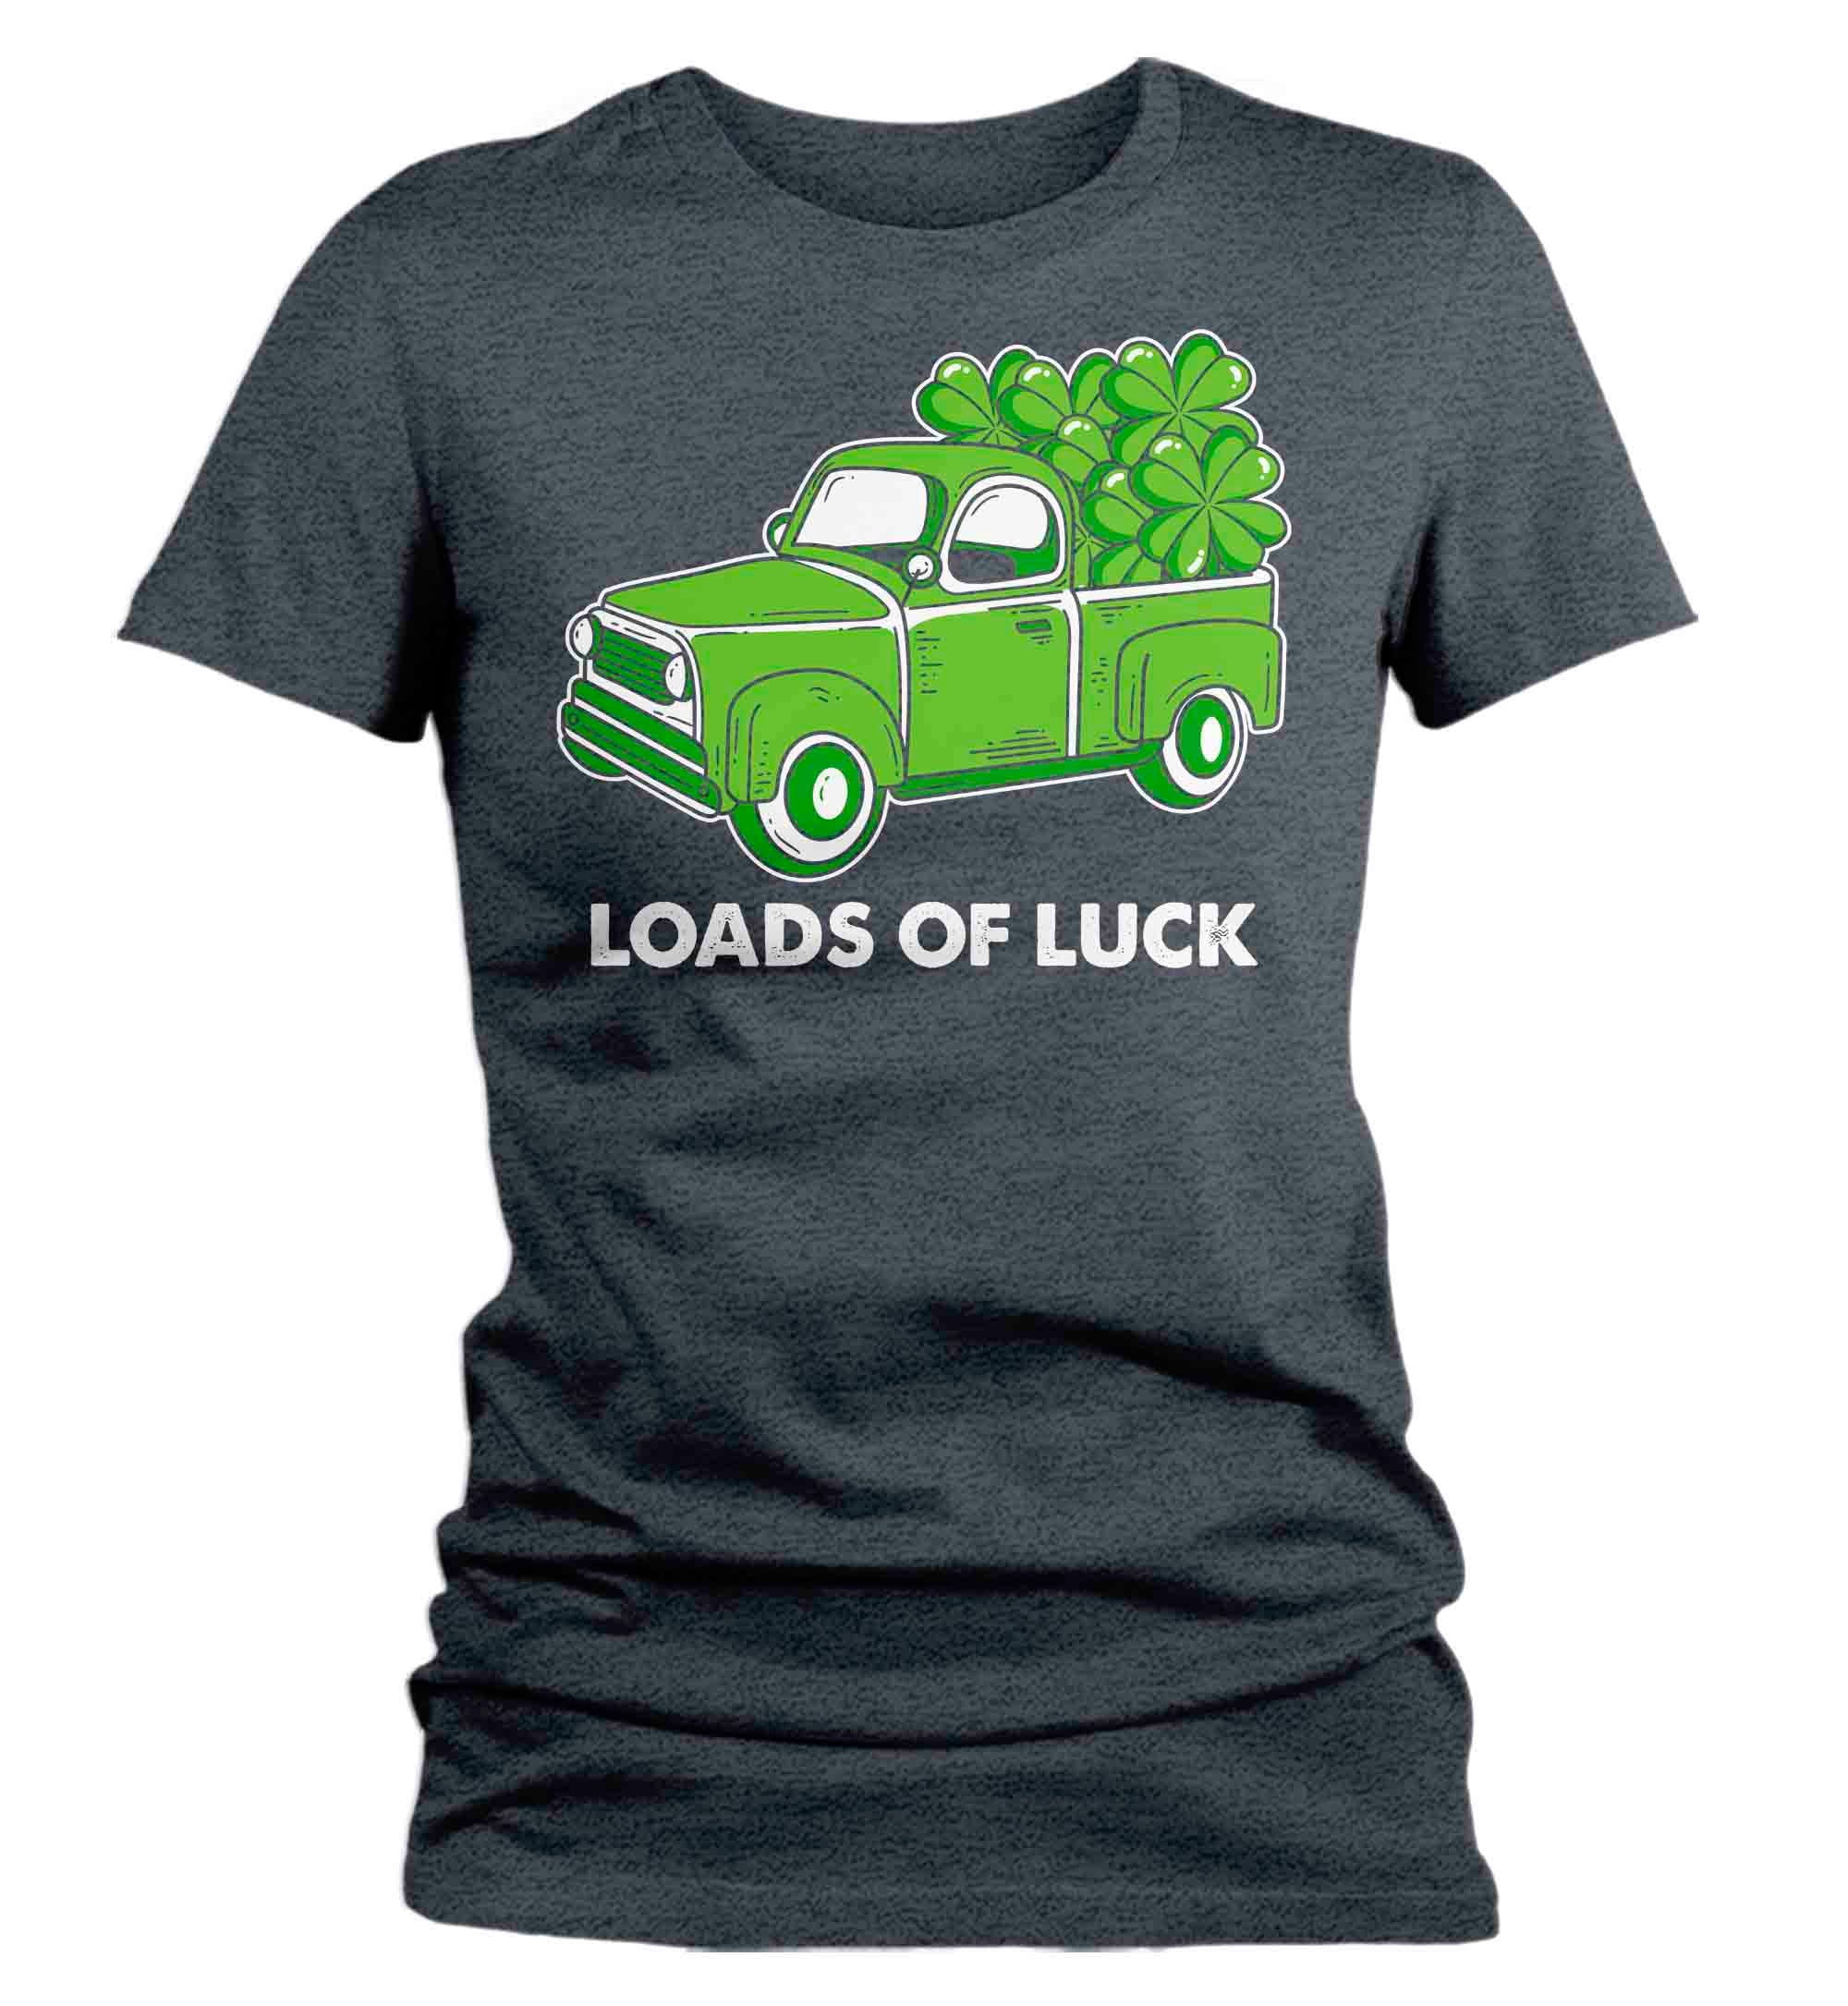 Women's Funny St. Patrick's Day Shirt Loads Of Luck T Sh